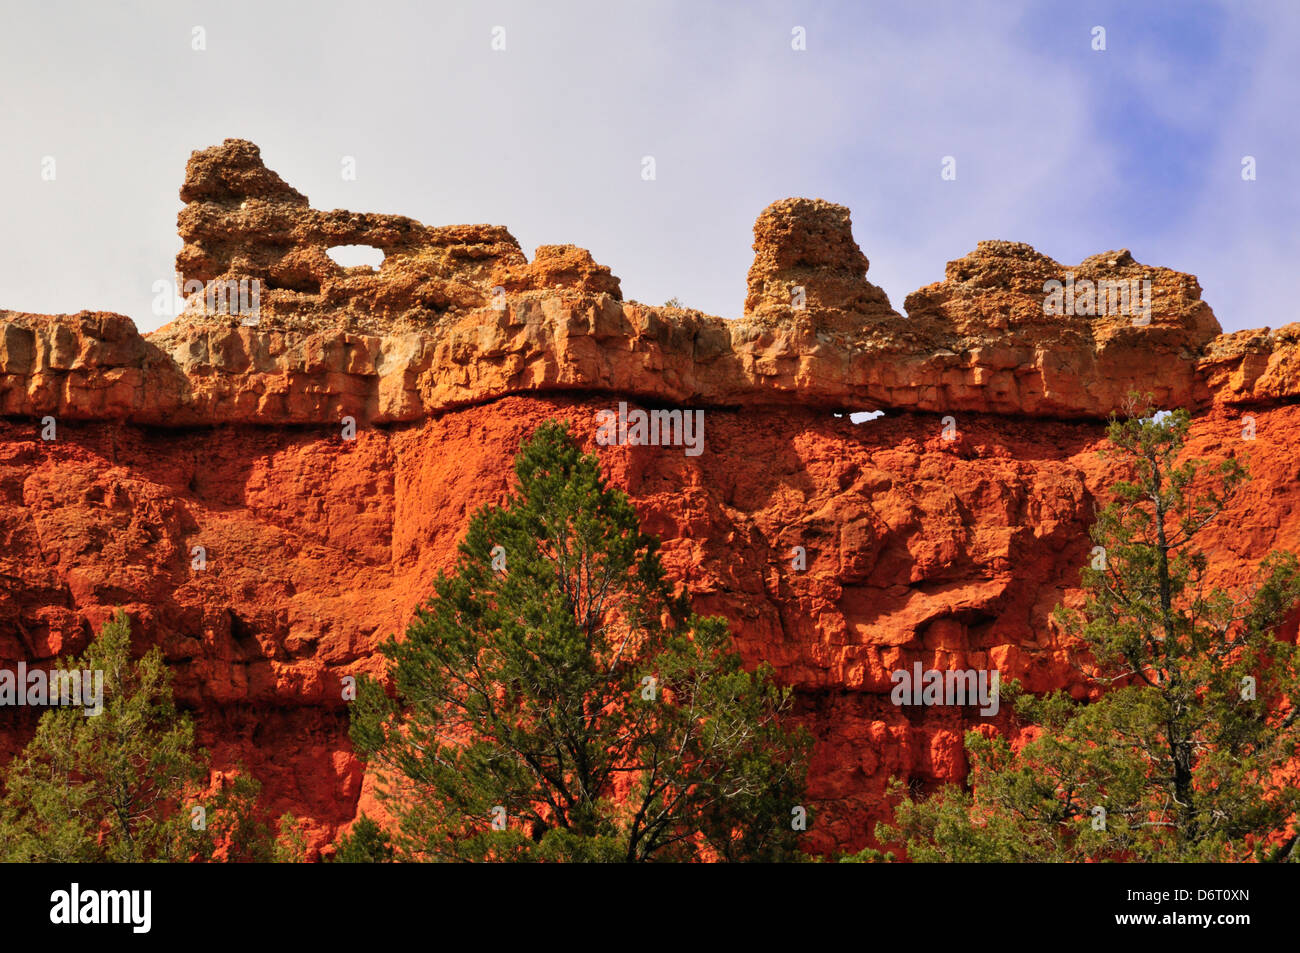 Erosion creates arches and fantastic rock shapes in Red Canyon, Utah Stock Photo